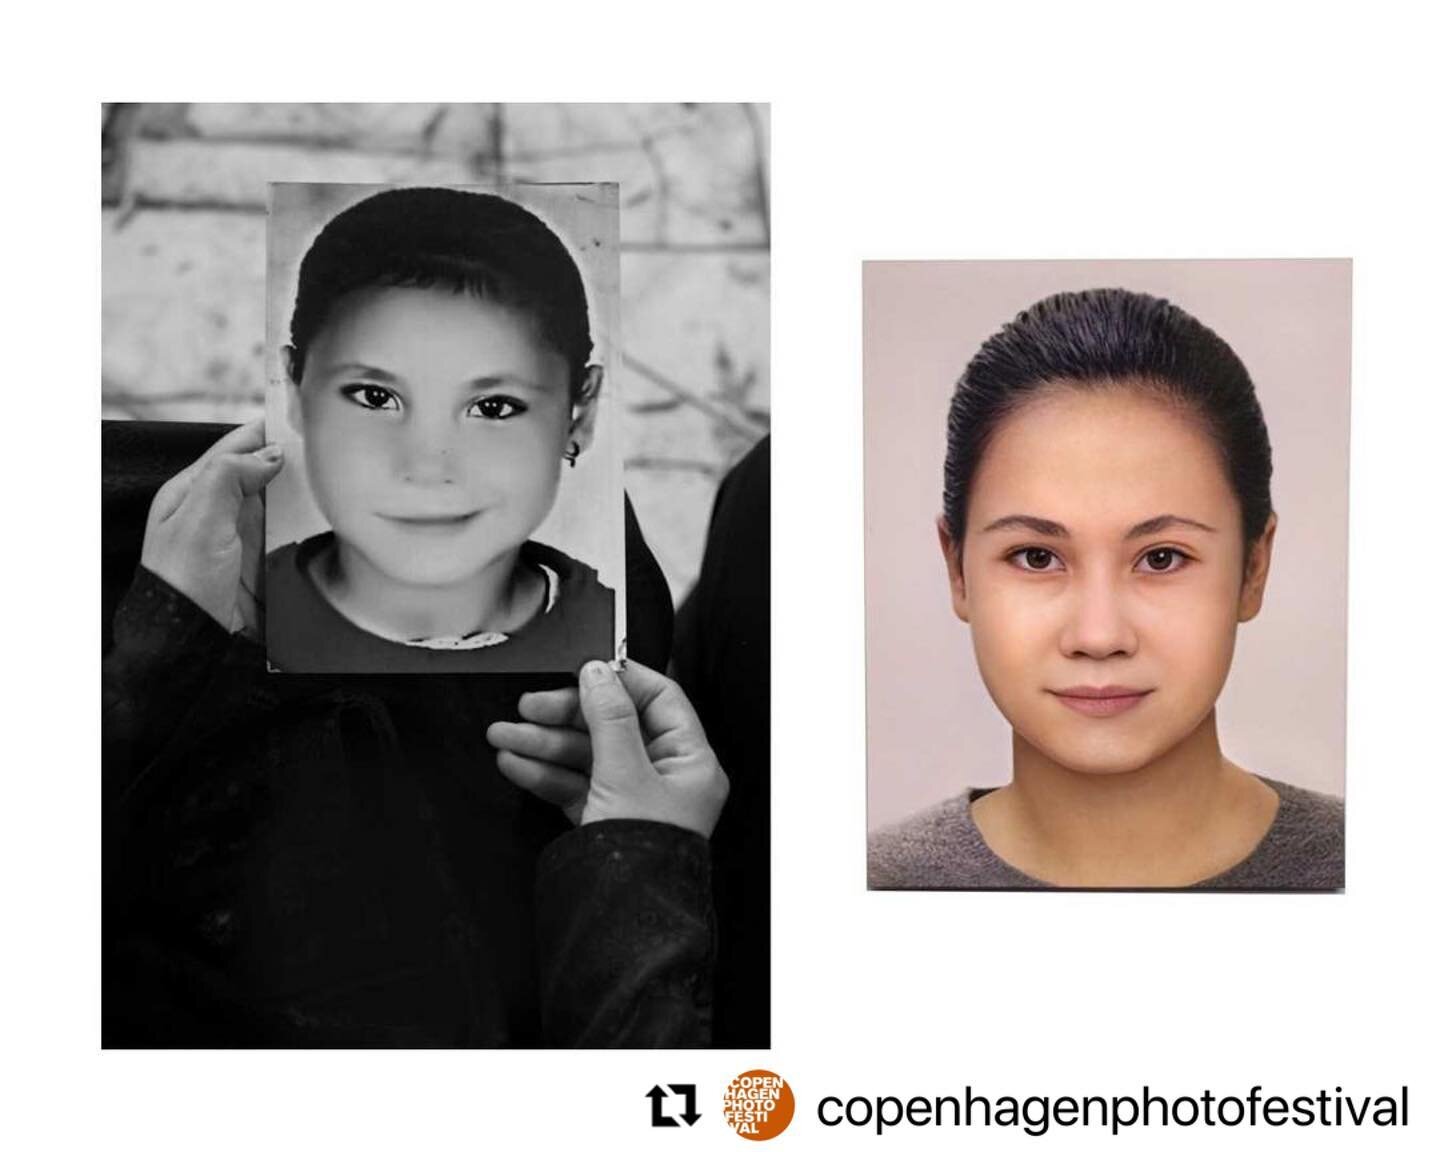 #Repost @copenhagenphotofestival 
・・・
[ ENTANGLEMENT // COPENHAGEN PHOTO SELECTEE &ndash; LAMEES SALEH SHARAF EL DIN ]⁠
⁠
&ldquo;When I started meeting the families, I discovered that there were common, recurring aspects in the families&rsquo; storie